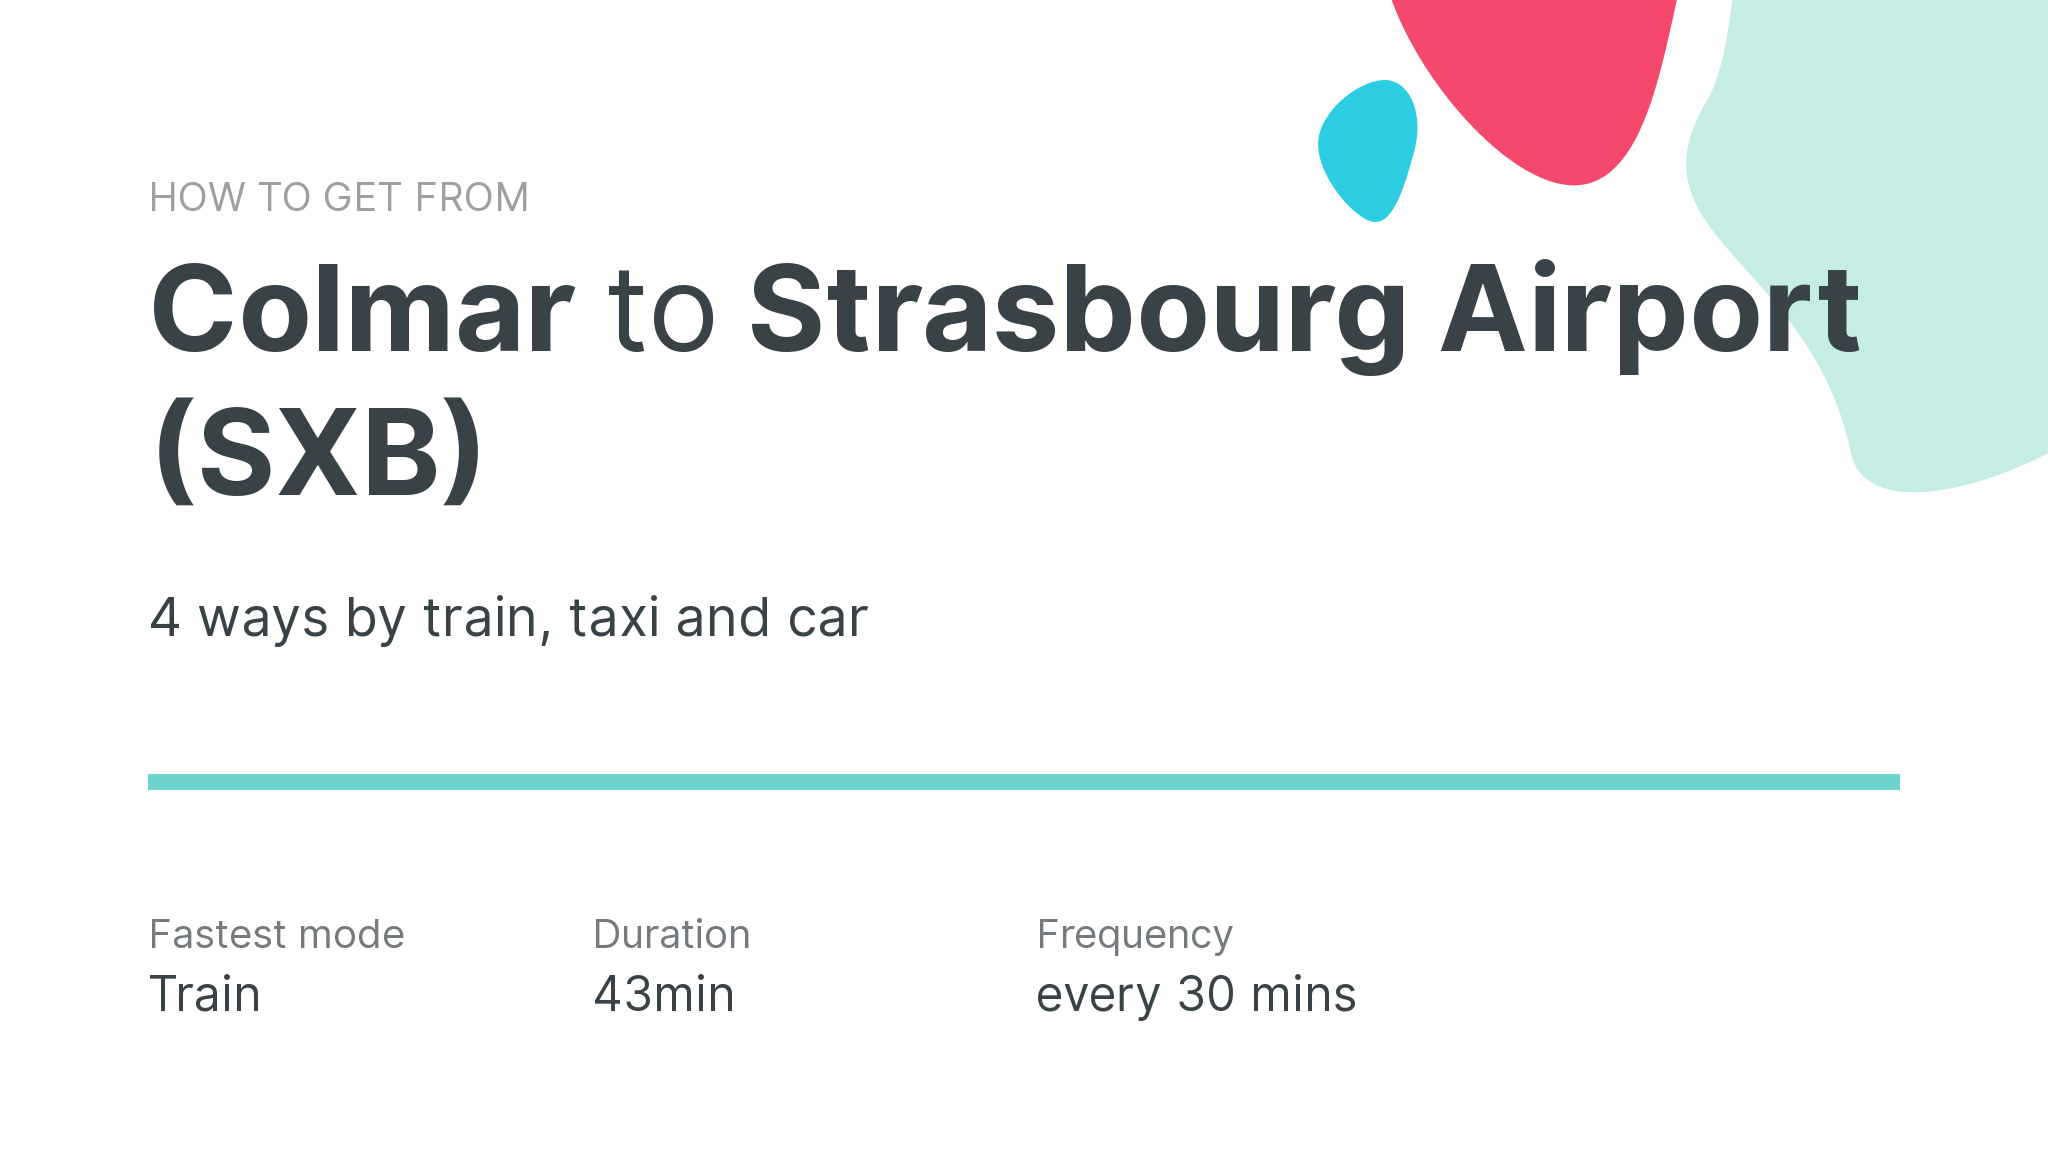 How do I get from Colmar to Strasbourg Airport (SXB)